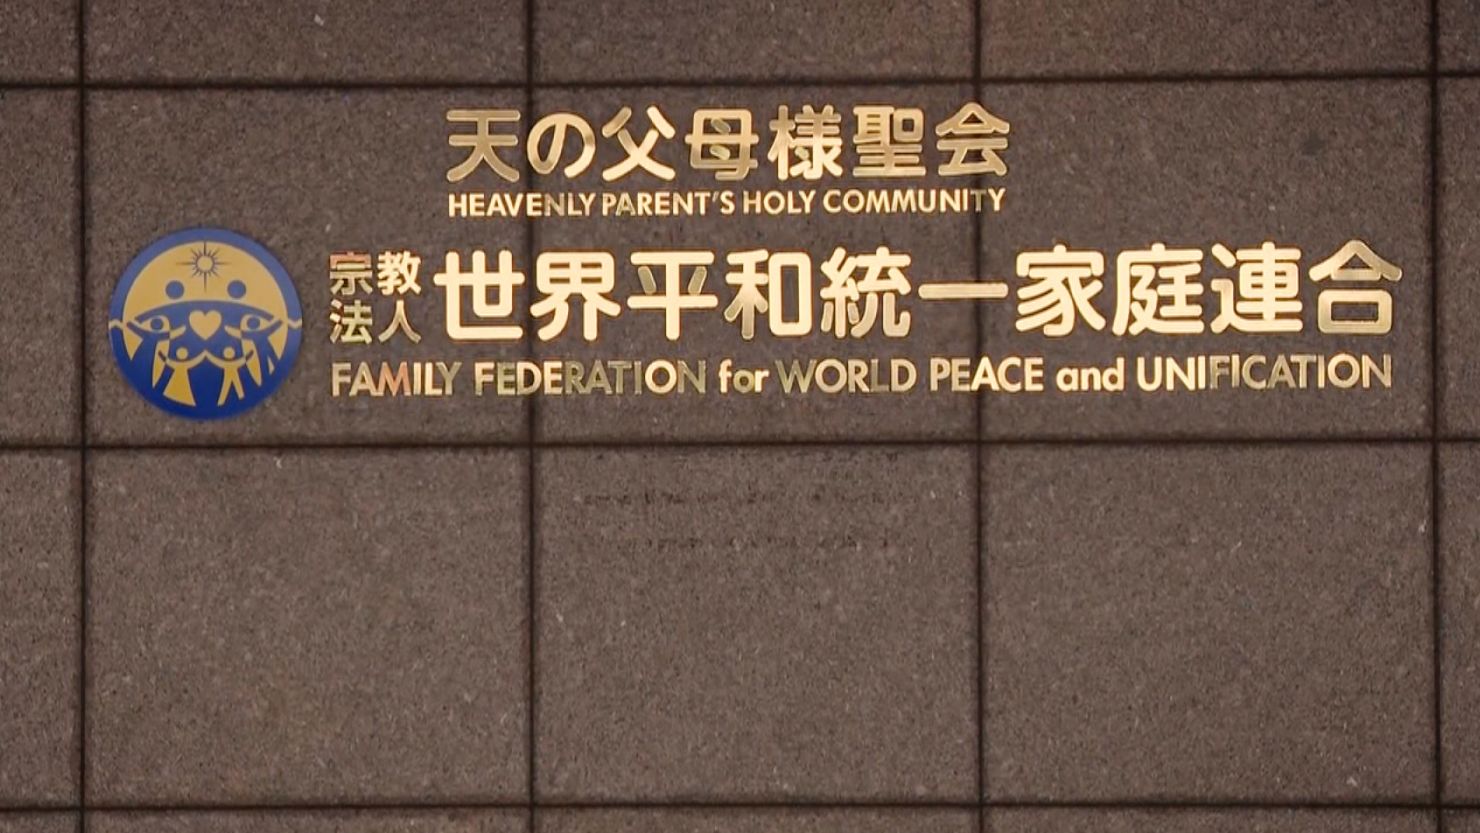 A plaque for the Unification Church, formally the Family Federation for World Peace and Unification.